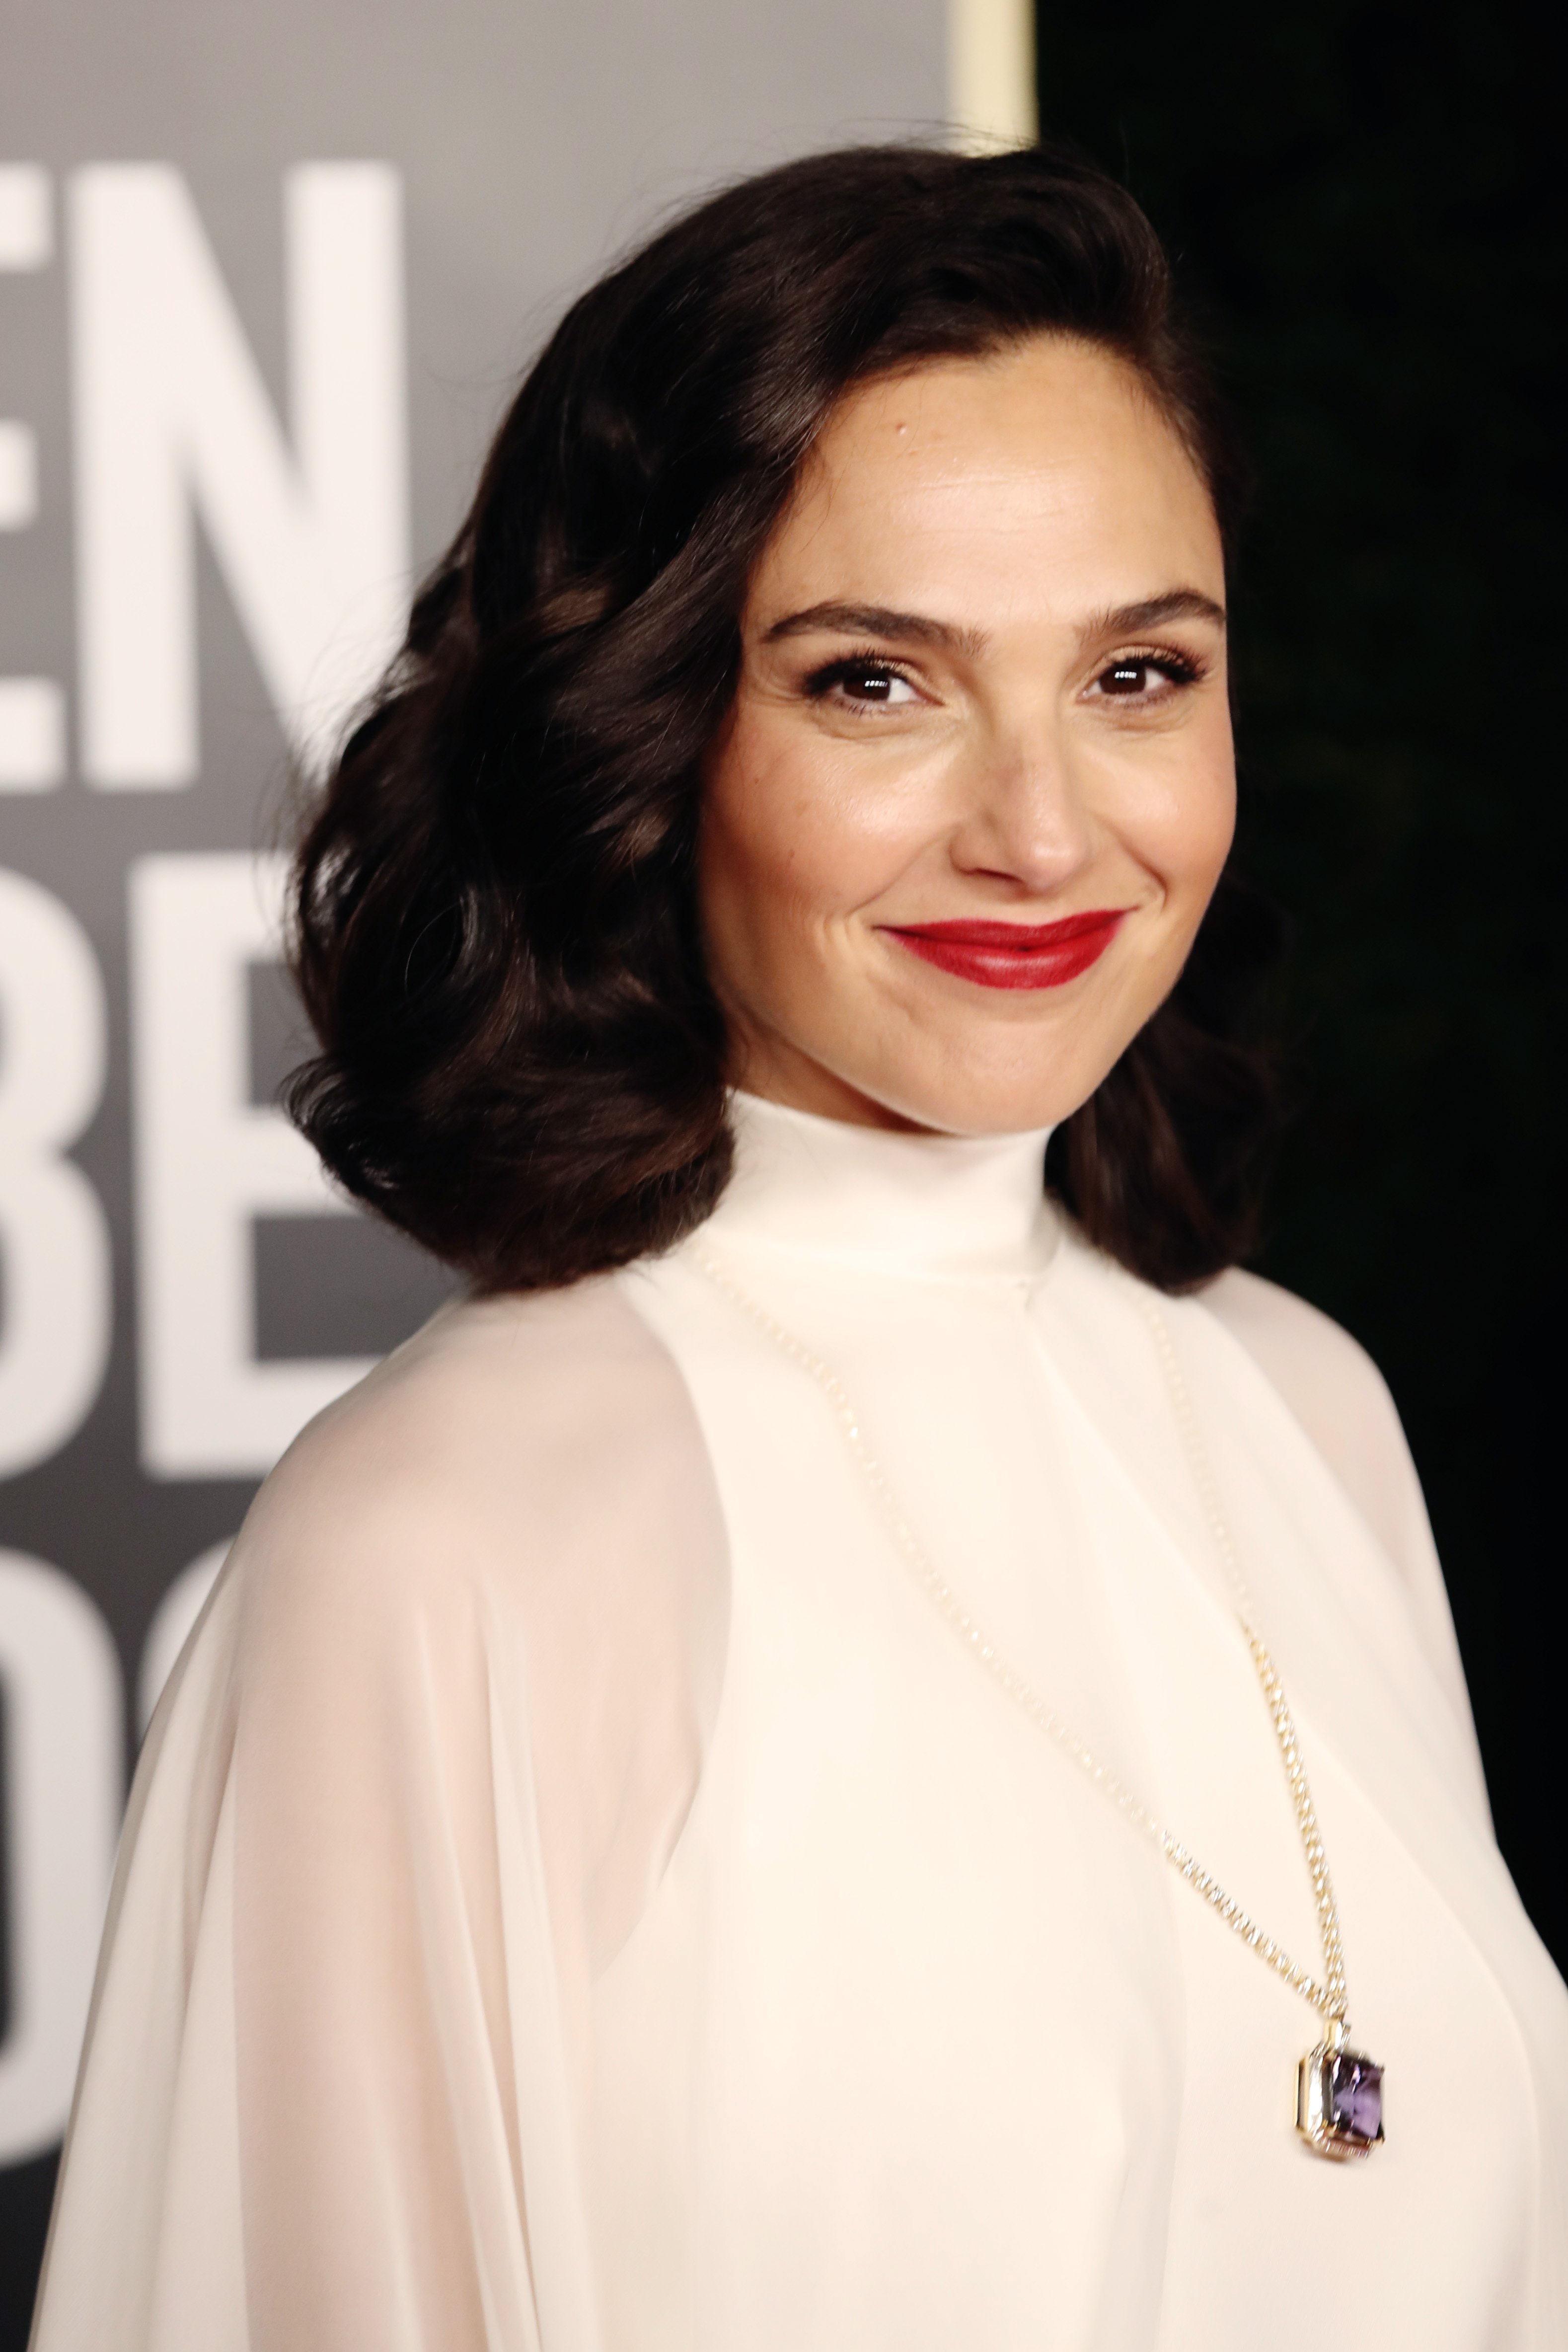 Gal Gadot smiling in a white gown at the 78th Annual Golden Globe Awards